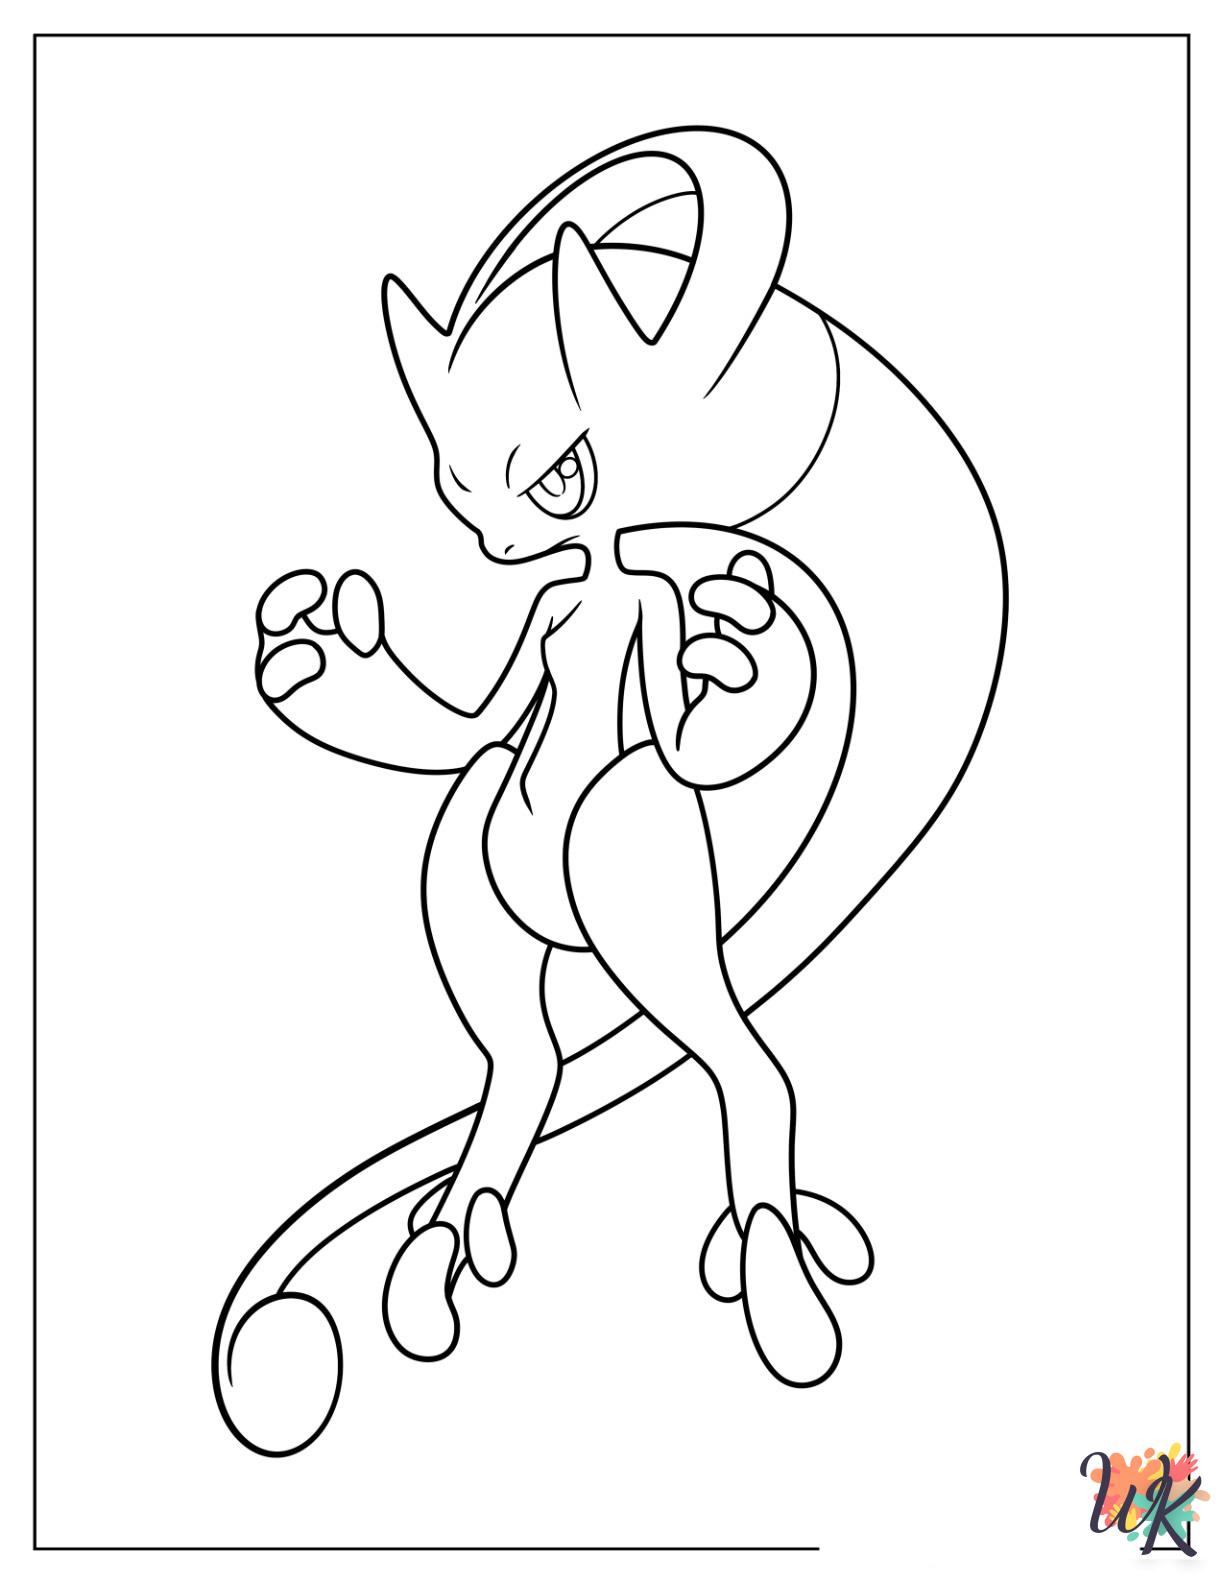 free printable Mewtwo coloring pages for adults